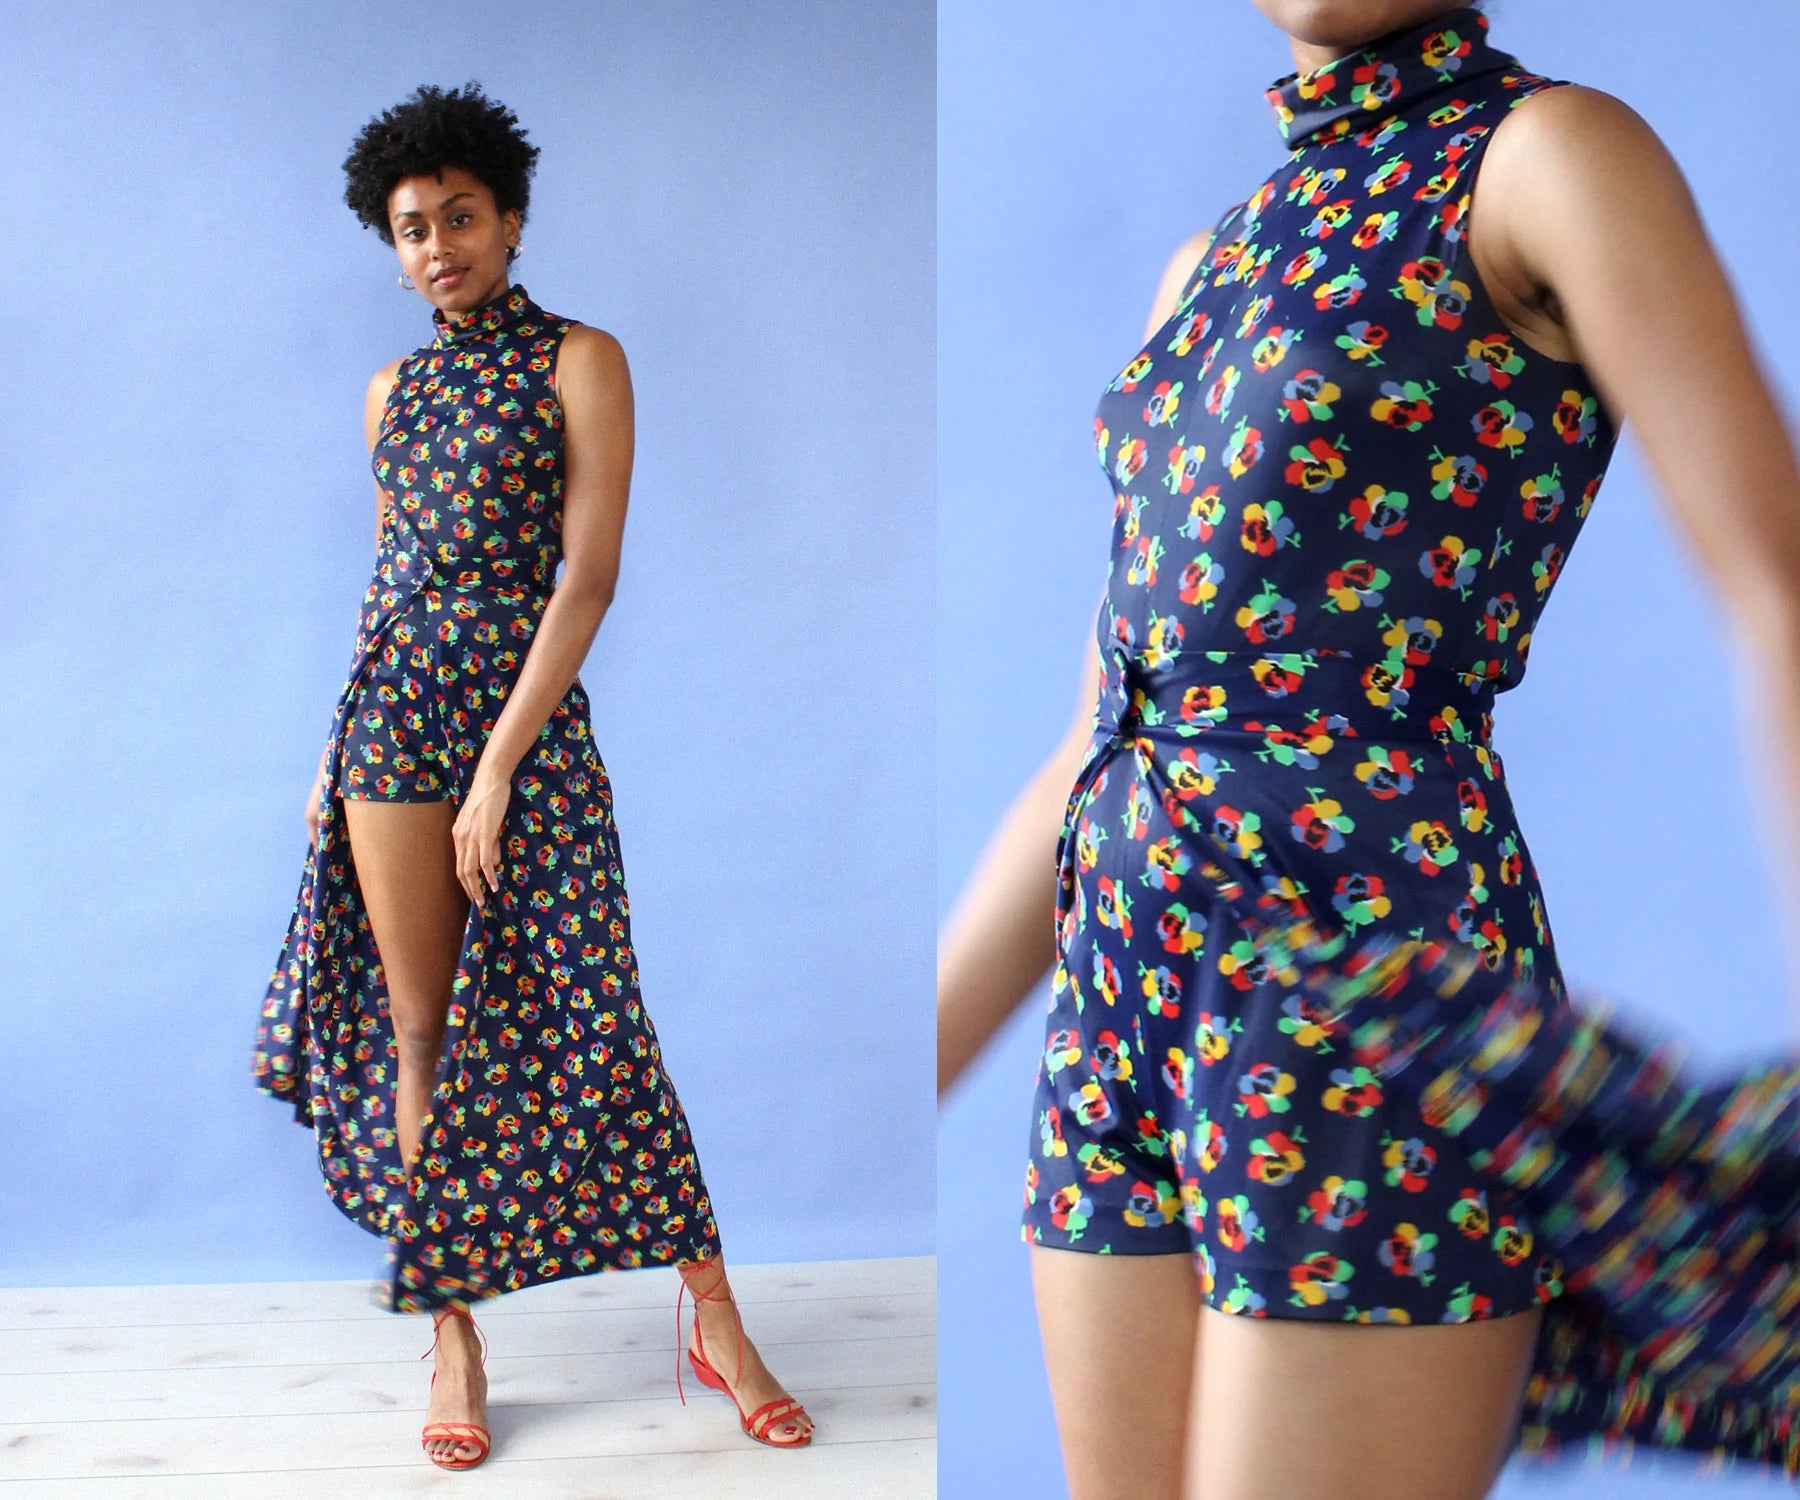 A two pane image of the same model wearing a dress in two different poses